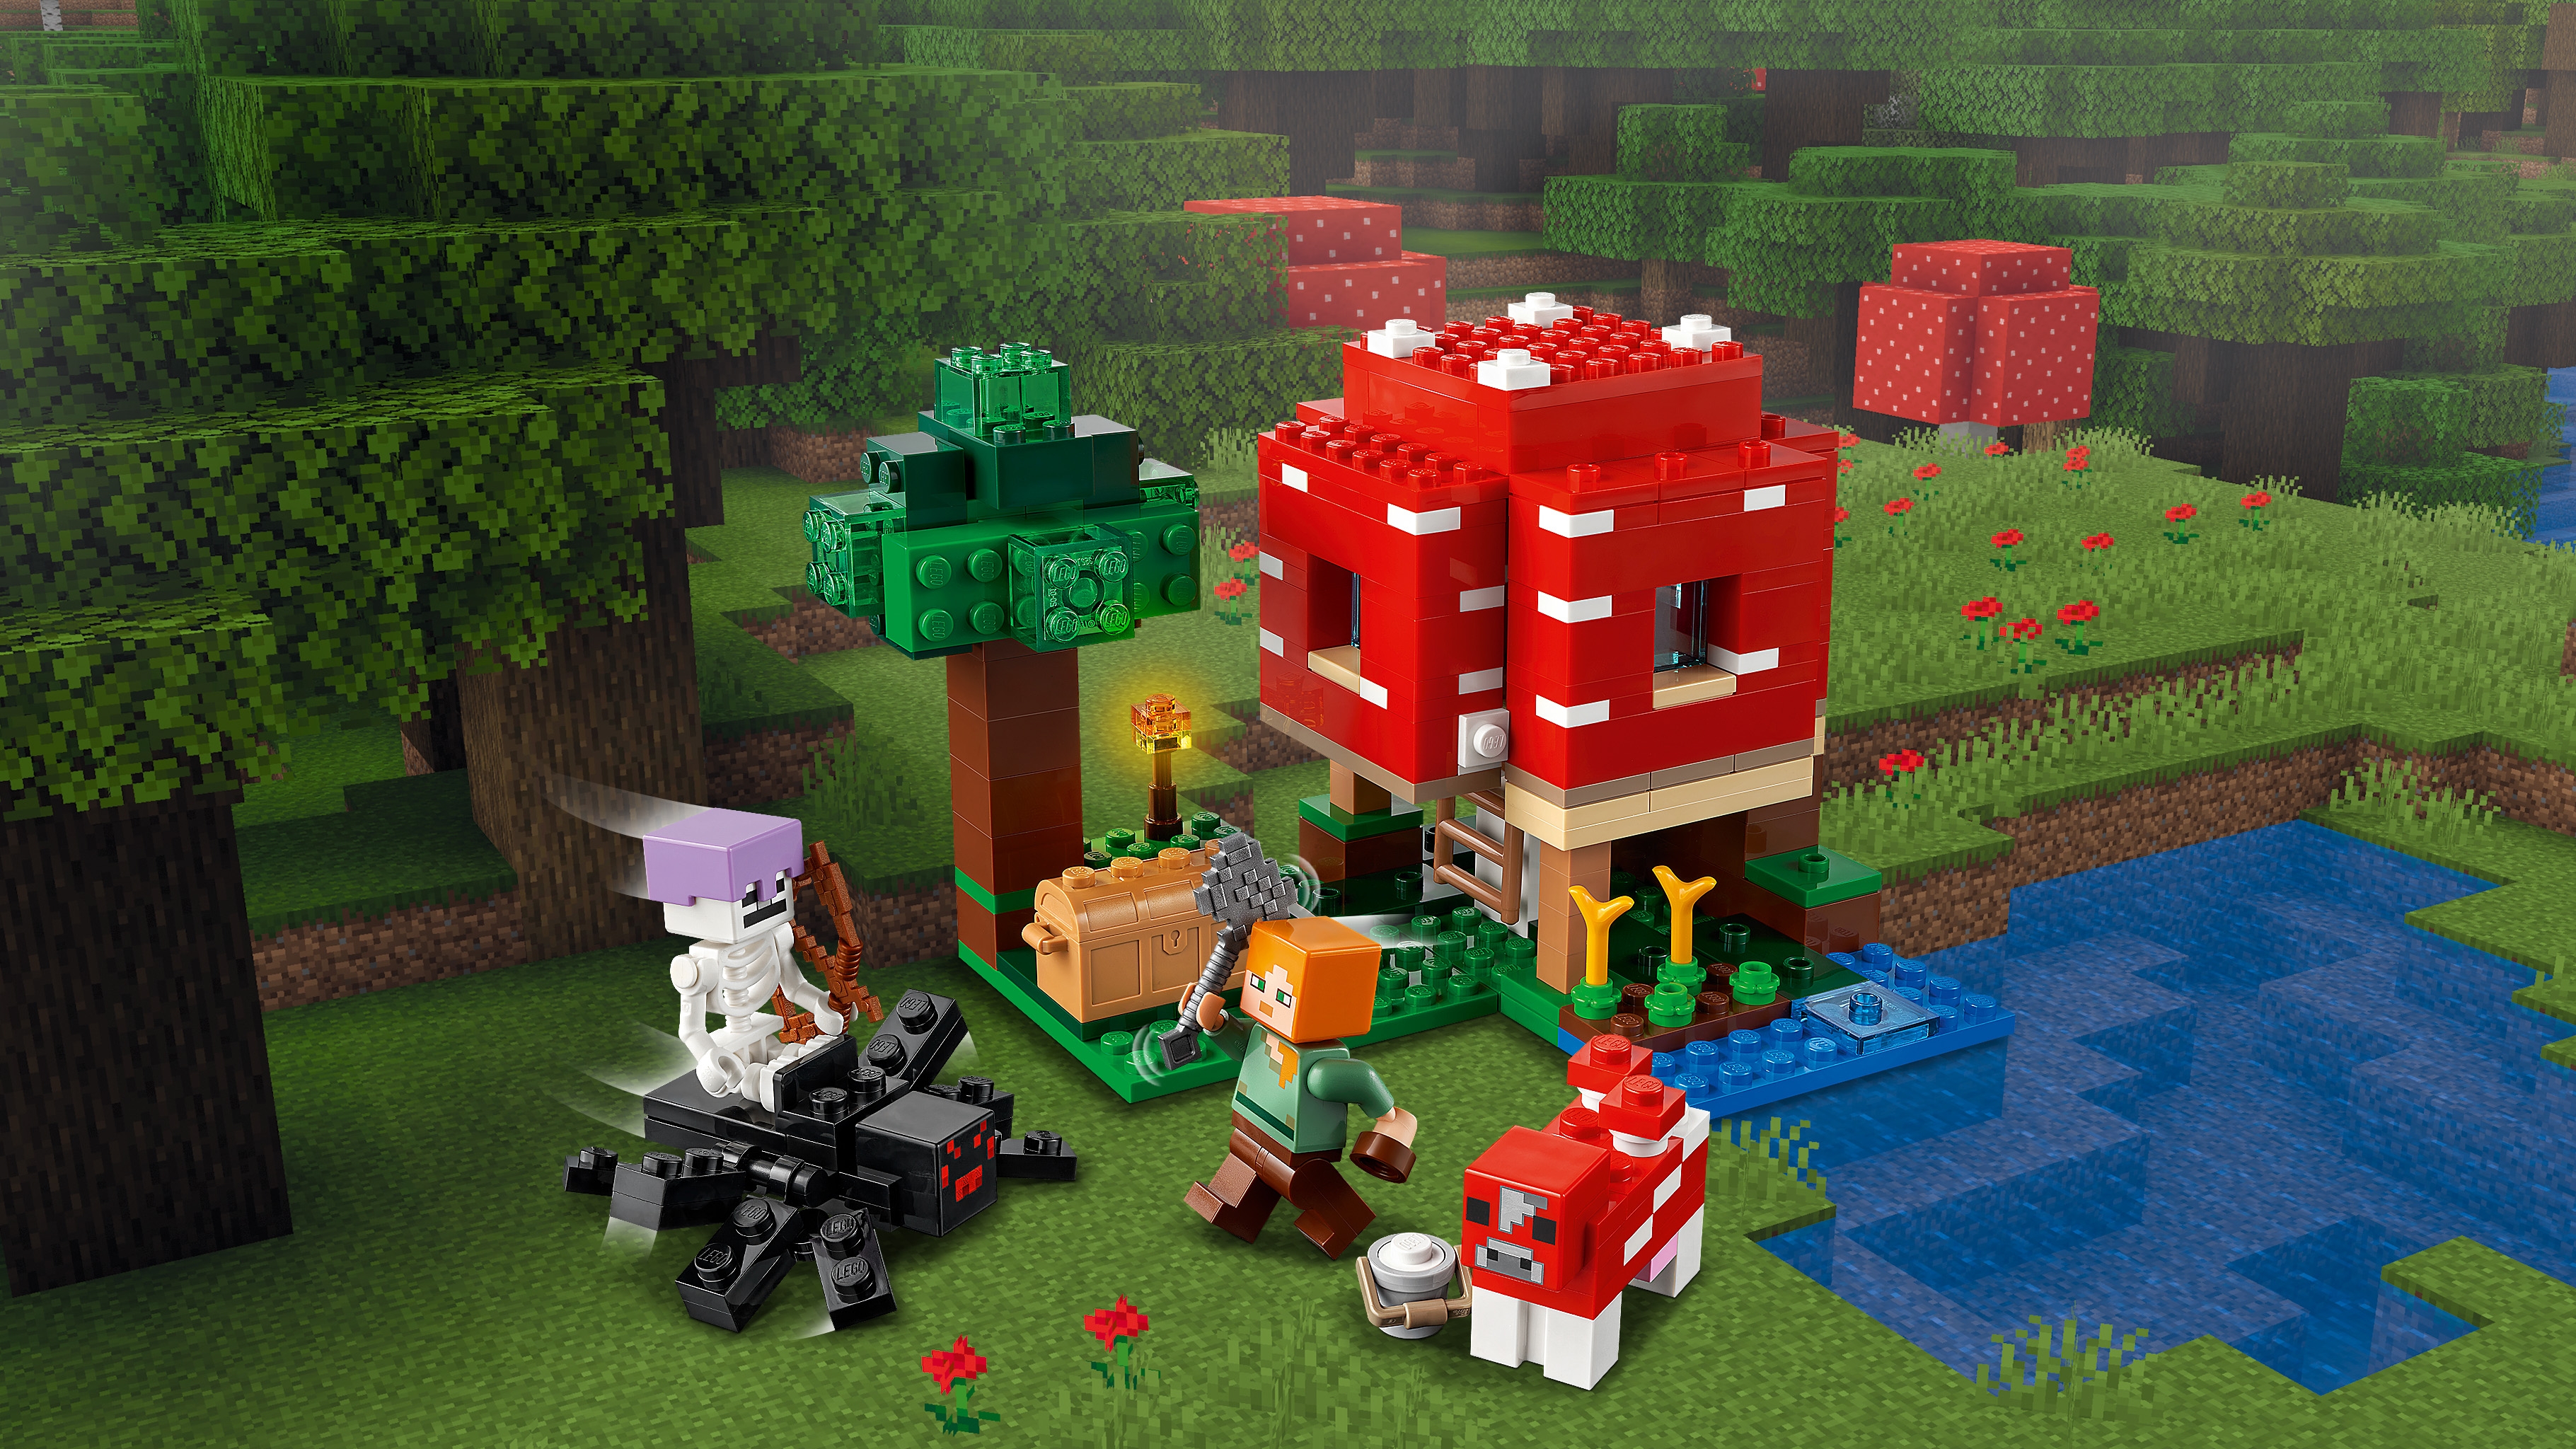 The Red Barn 21187 - LEGO® Minecraft™ Sets - LEGO.com for kids